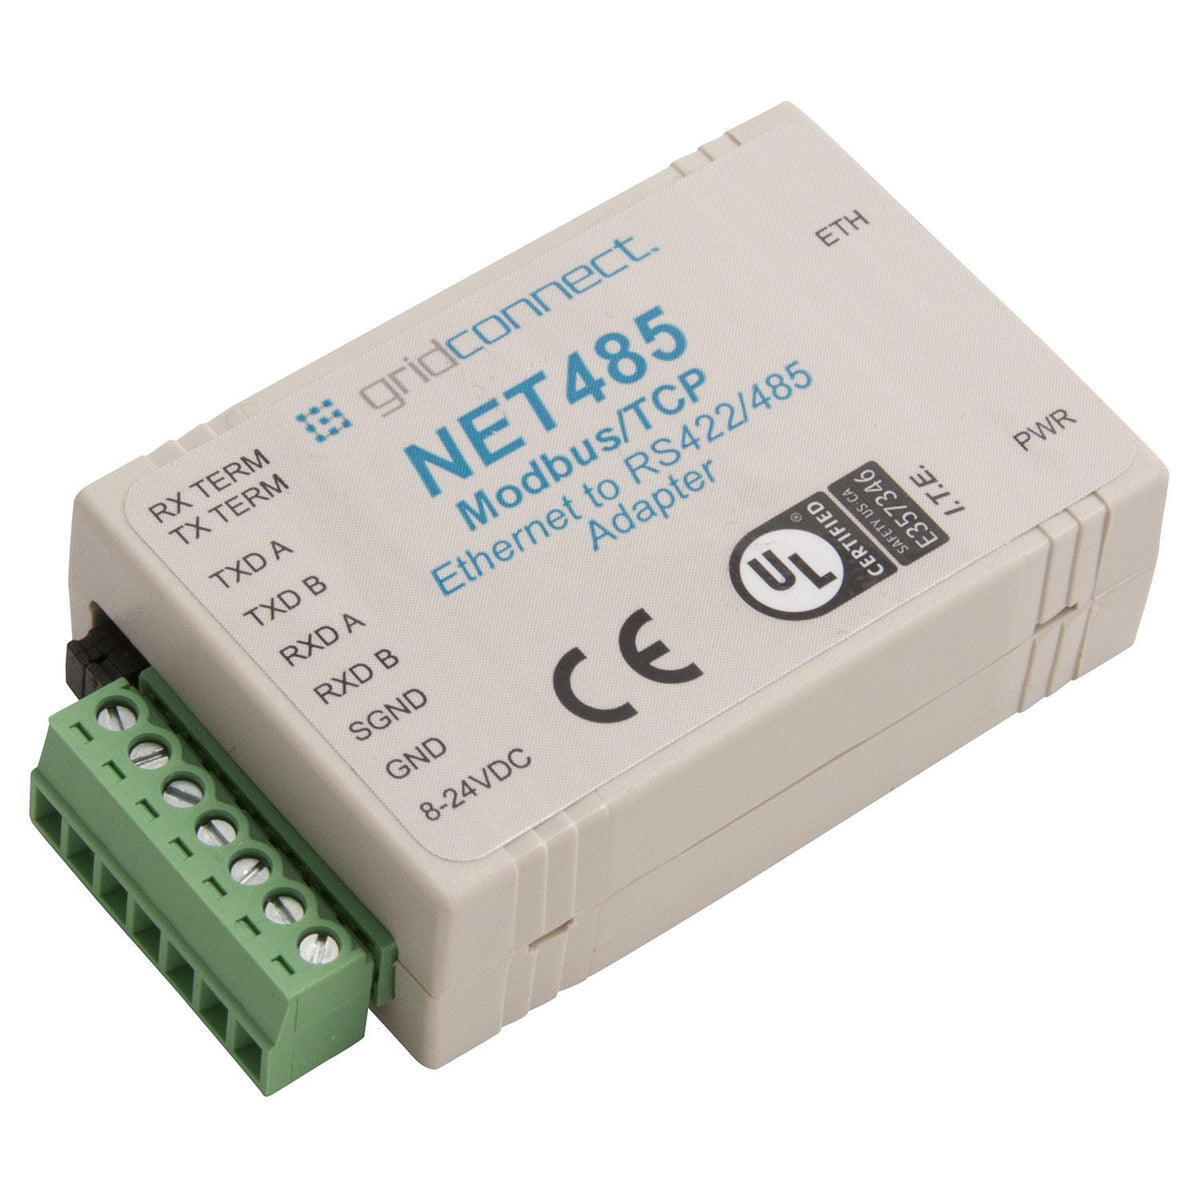 Conquest onion environment Modbus RS485 Adapter - NET485-MB - No mount – Grid Connect